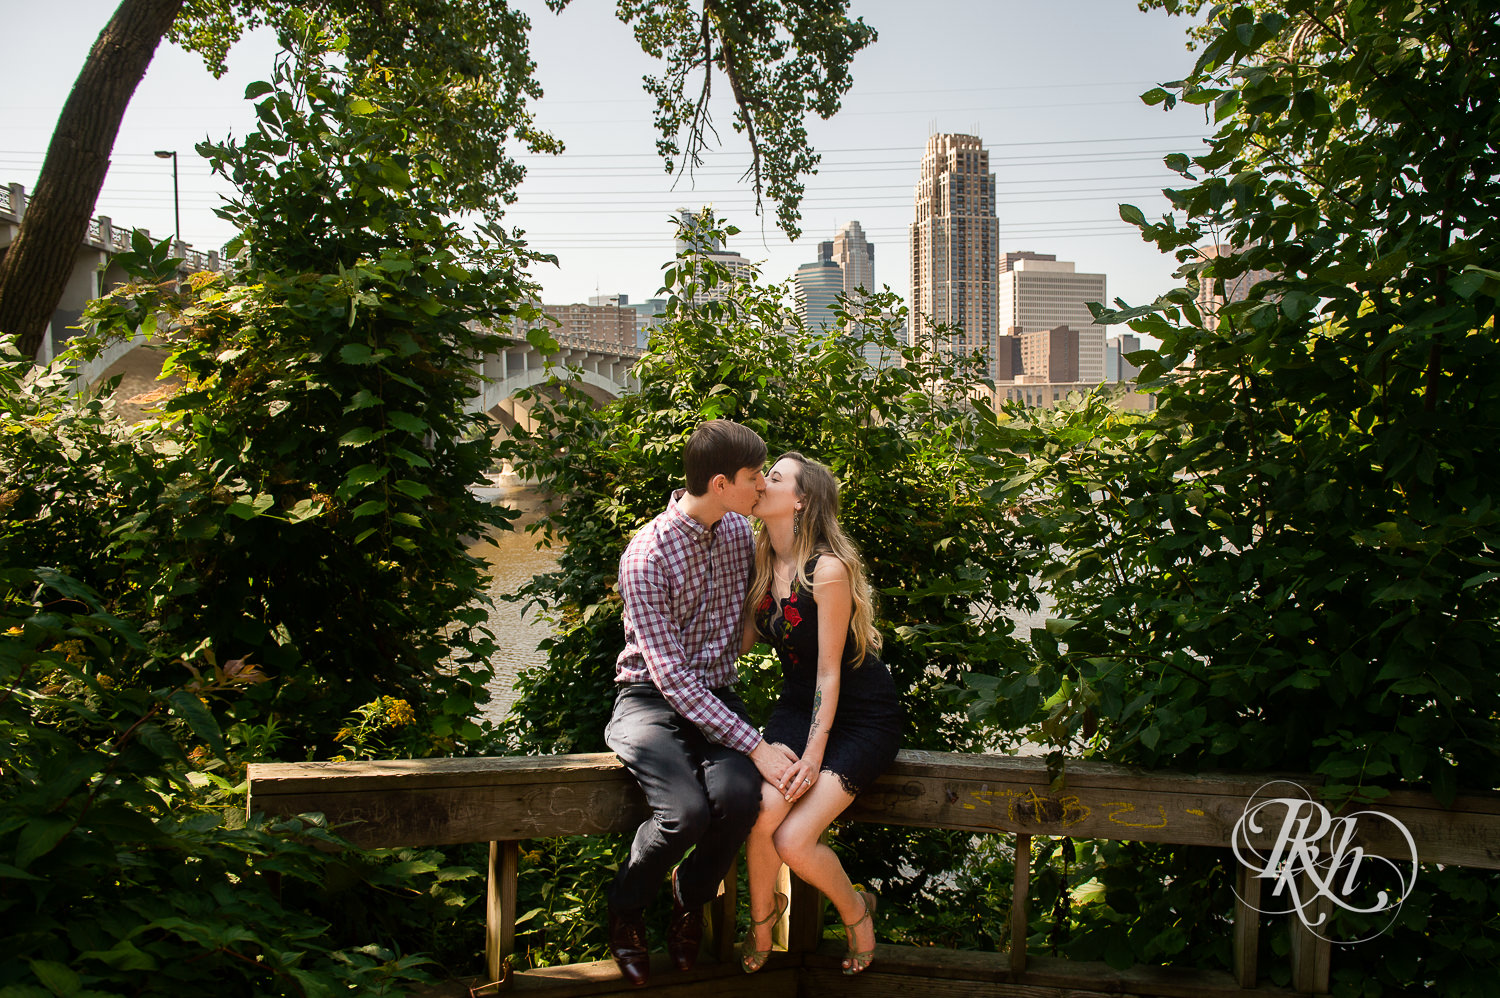 Man and woman in black lace dress kiss in Saint Anthony Main in Minneapolis, Minnesota in front of the city skyline.